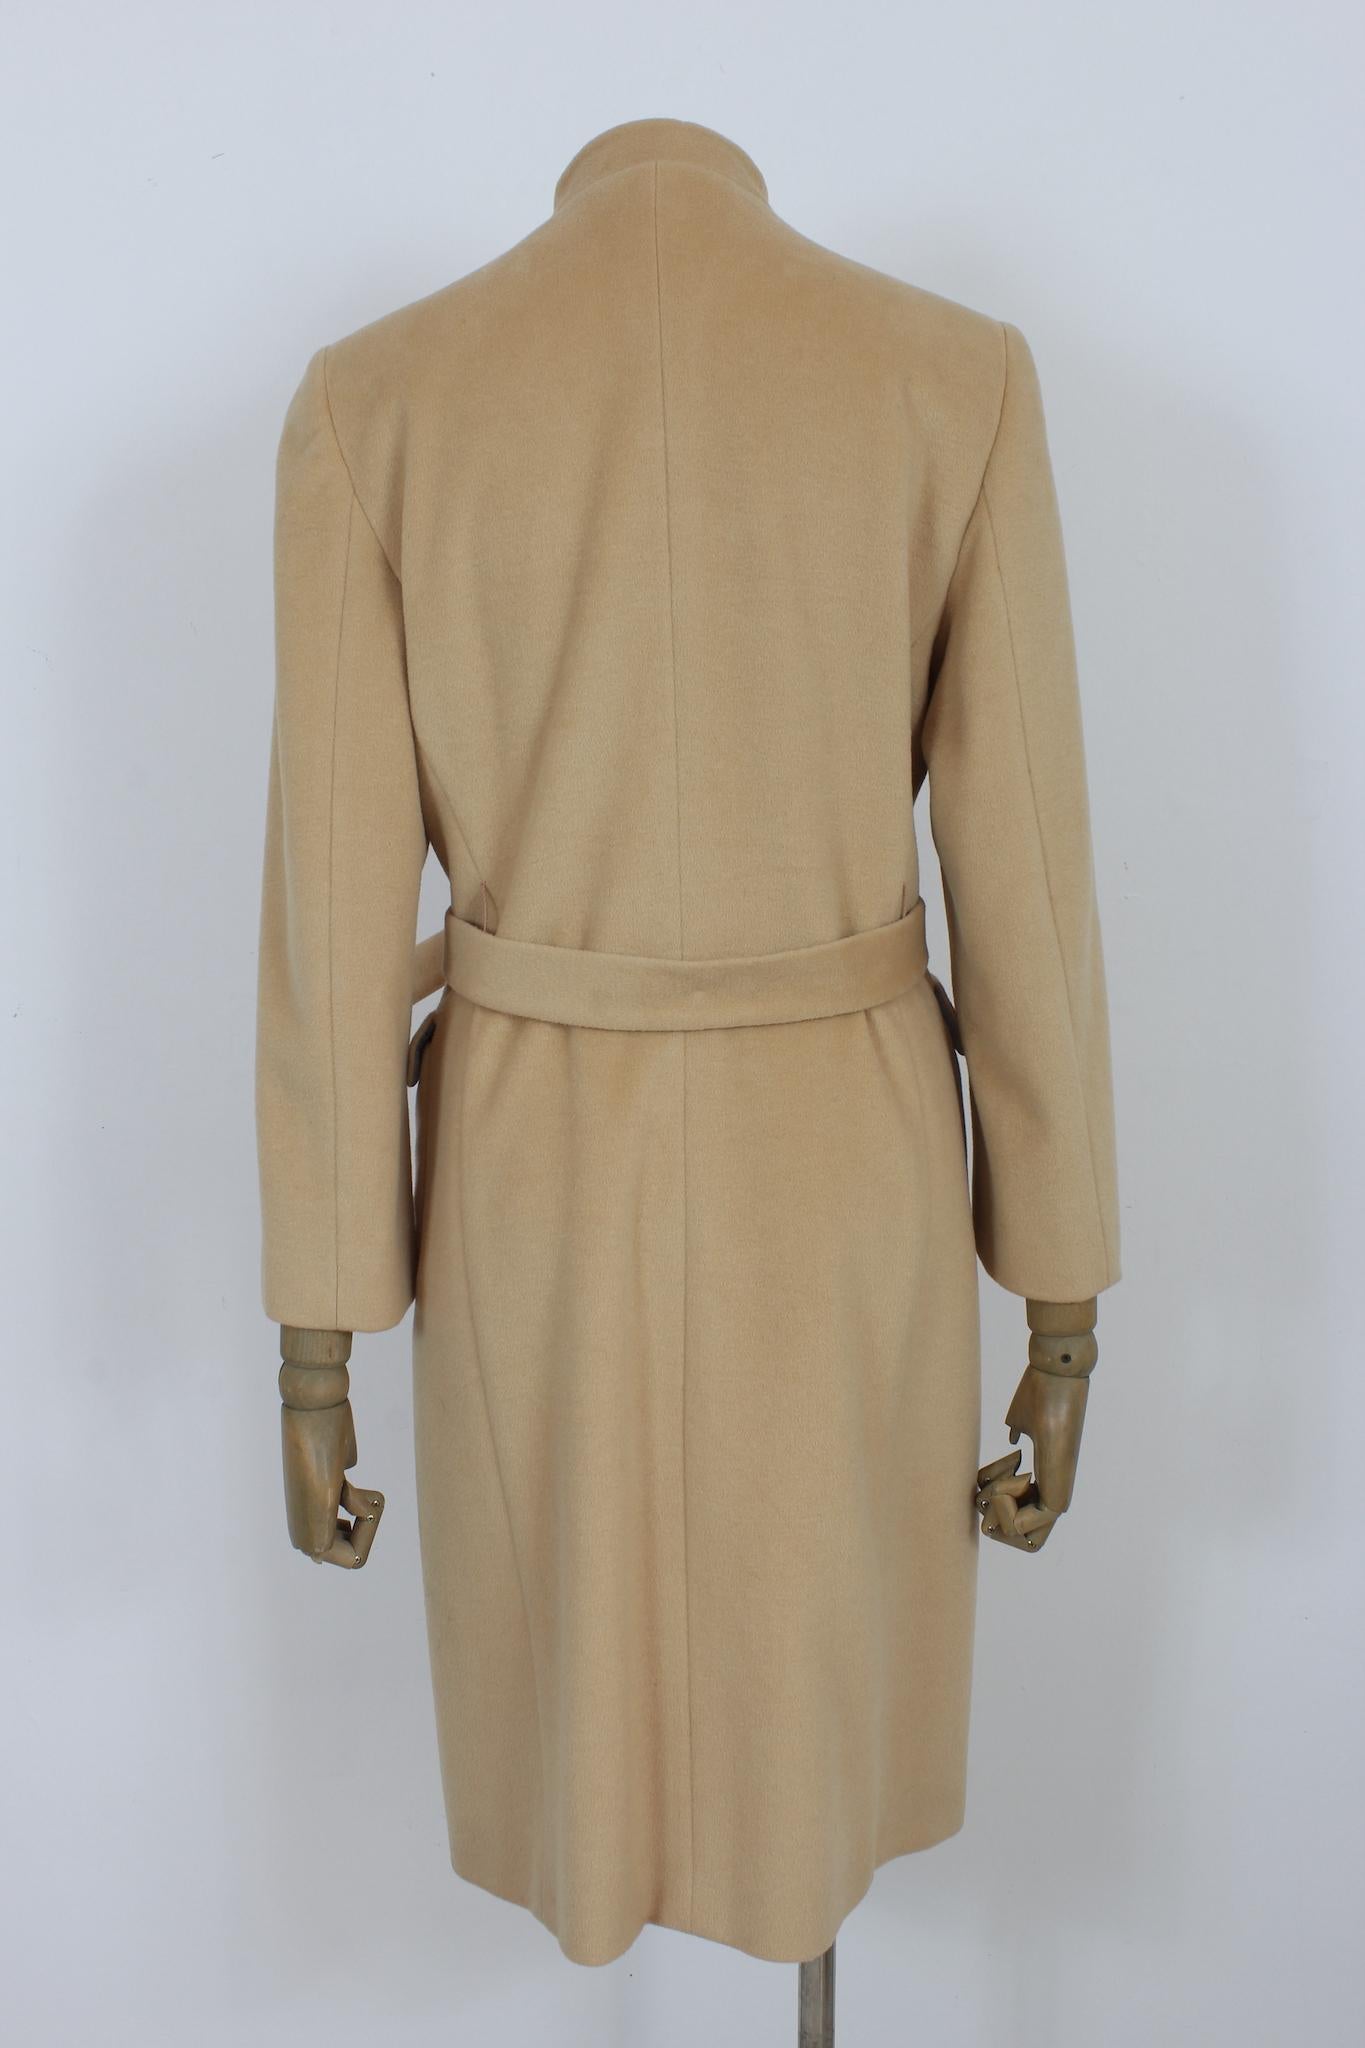 Valentino 2000s beige long coat. Double-breasted model with golden buttons. Adjustable waist belt. 50% wool, 30% angora, 20% silk fabric, internally lined. Made in italy.

Size: 42 It 8 Us 10 Uk

Shoulder: 42cm
Bust/Chest: 49 cm
Sleeve: 57